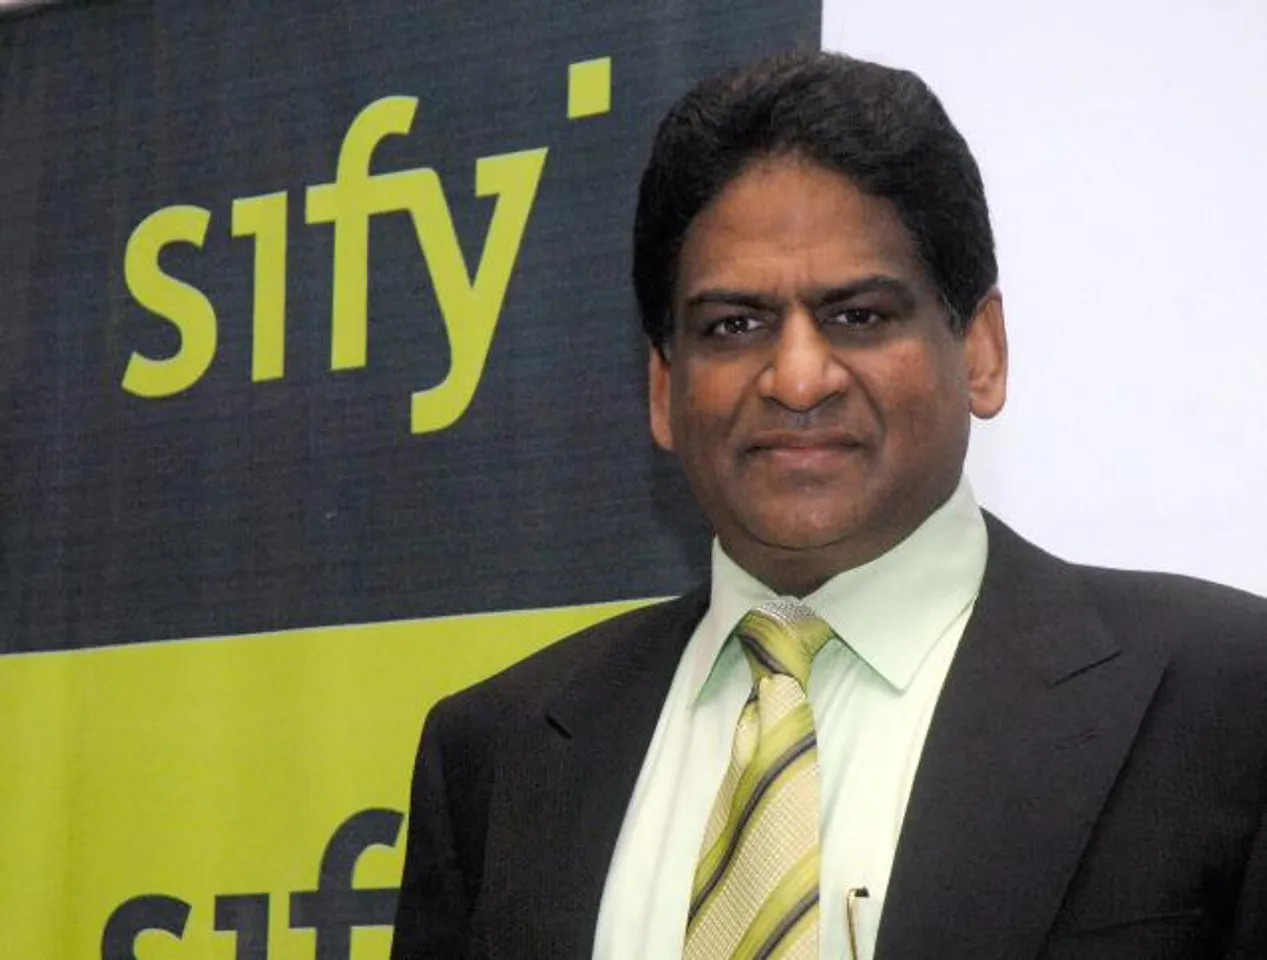 Sify Reports INR 4392 Mn as Revenue for 2nd Quarter